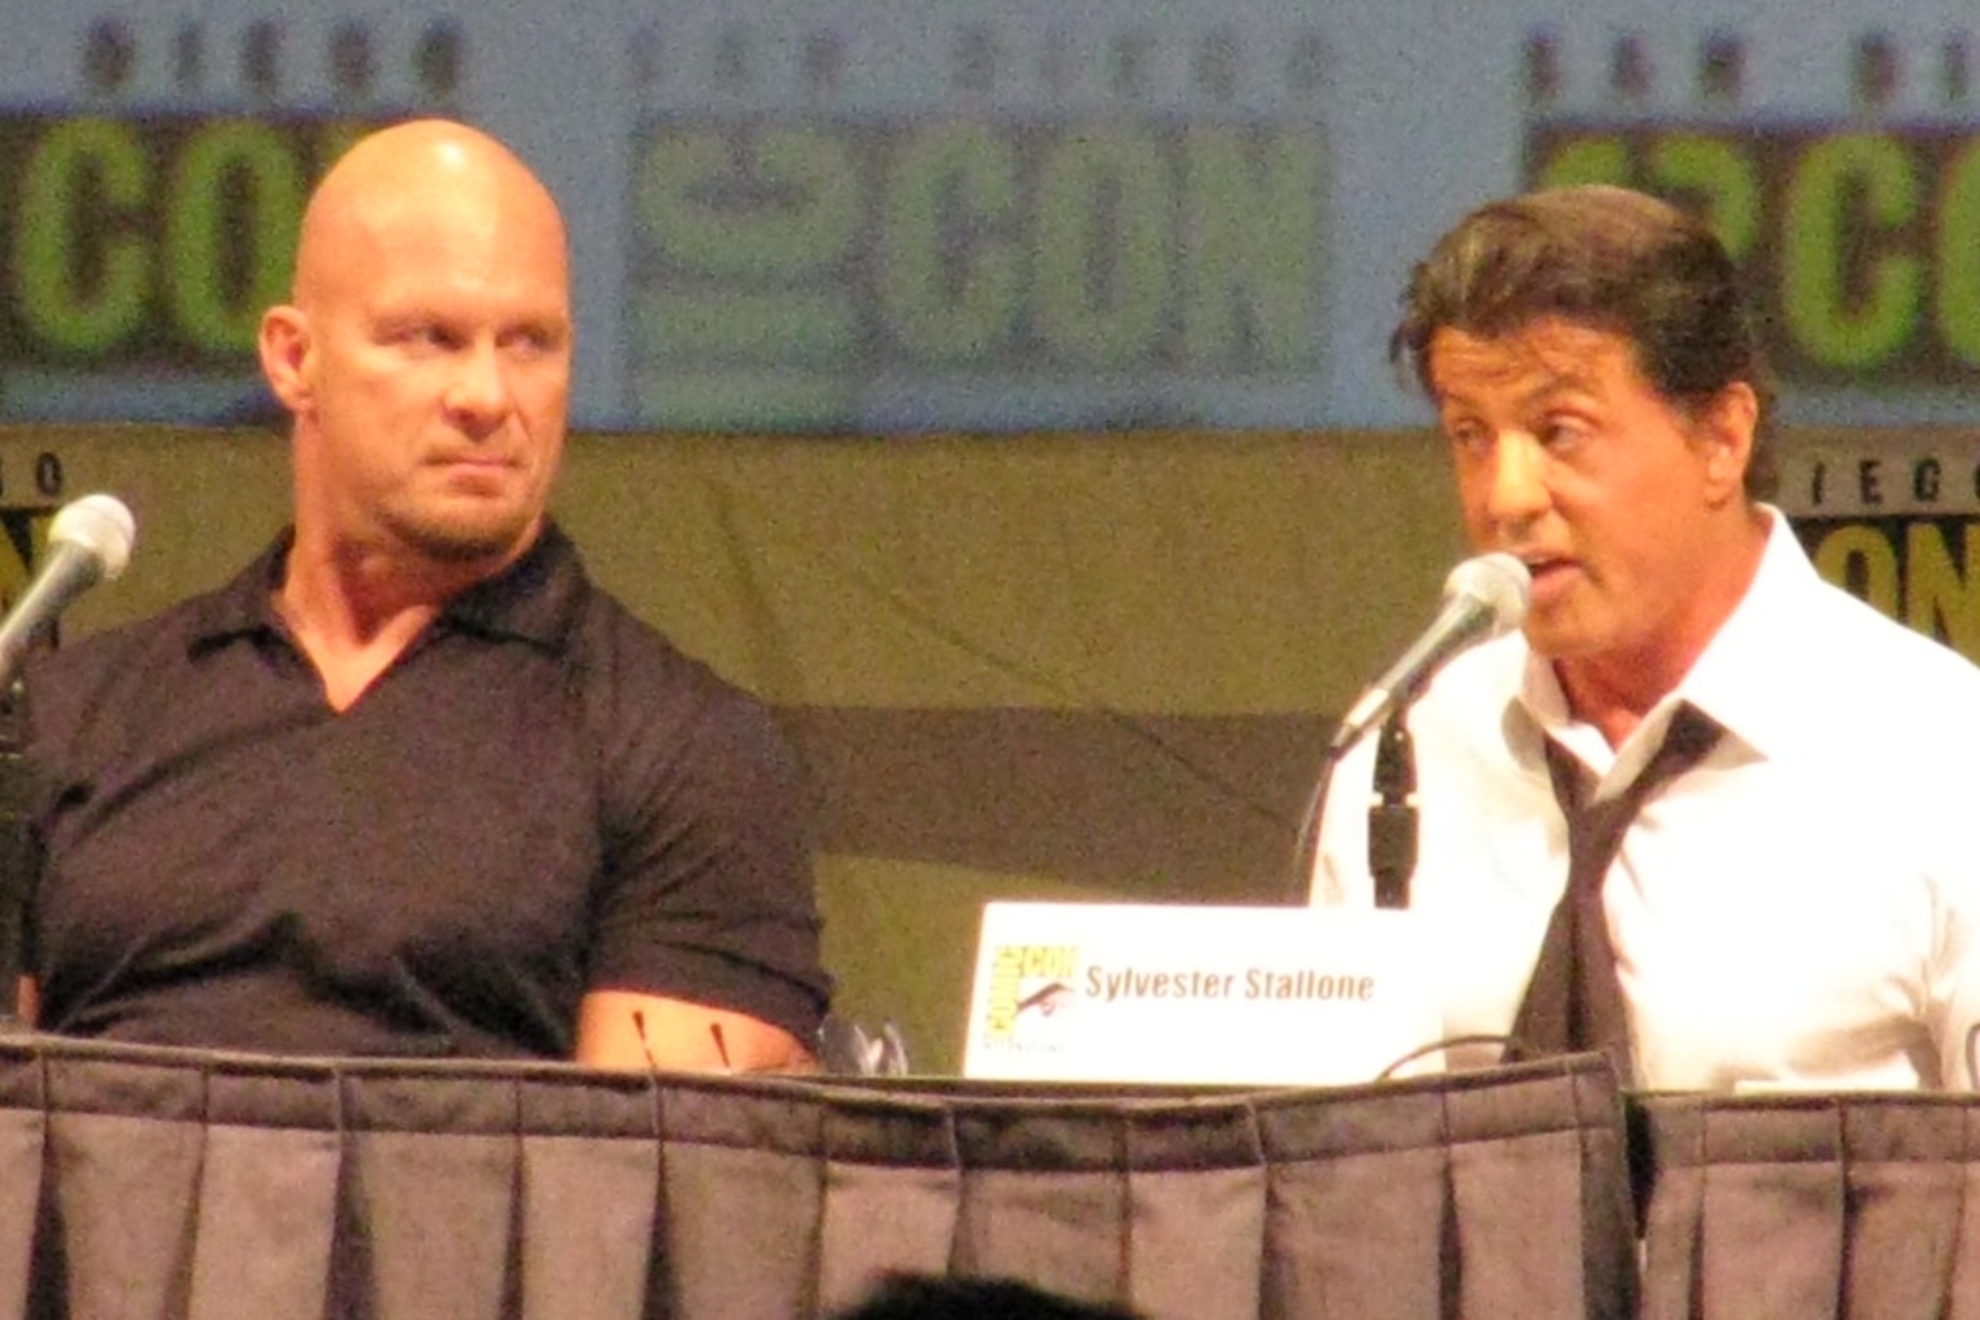 Stone Cold Steve Austin and Sylvester Stallone at Comic Con